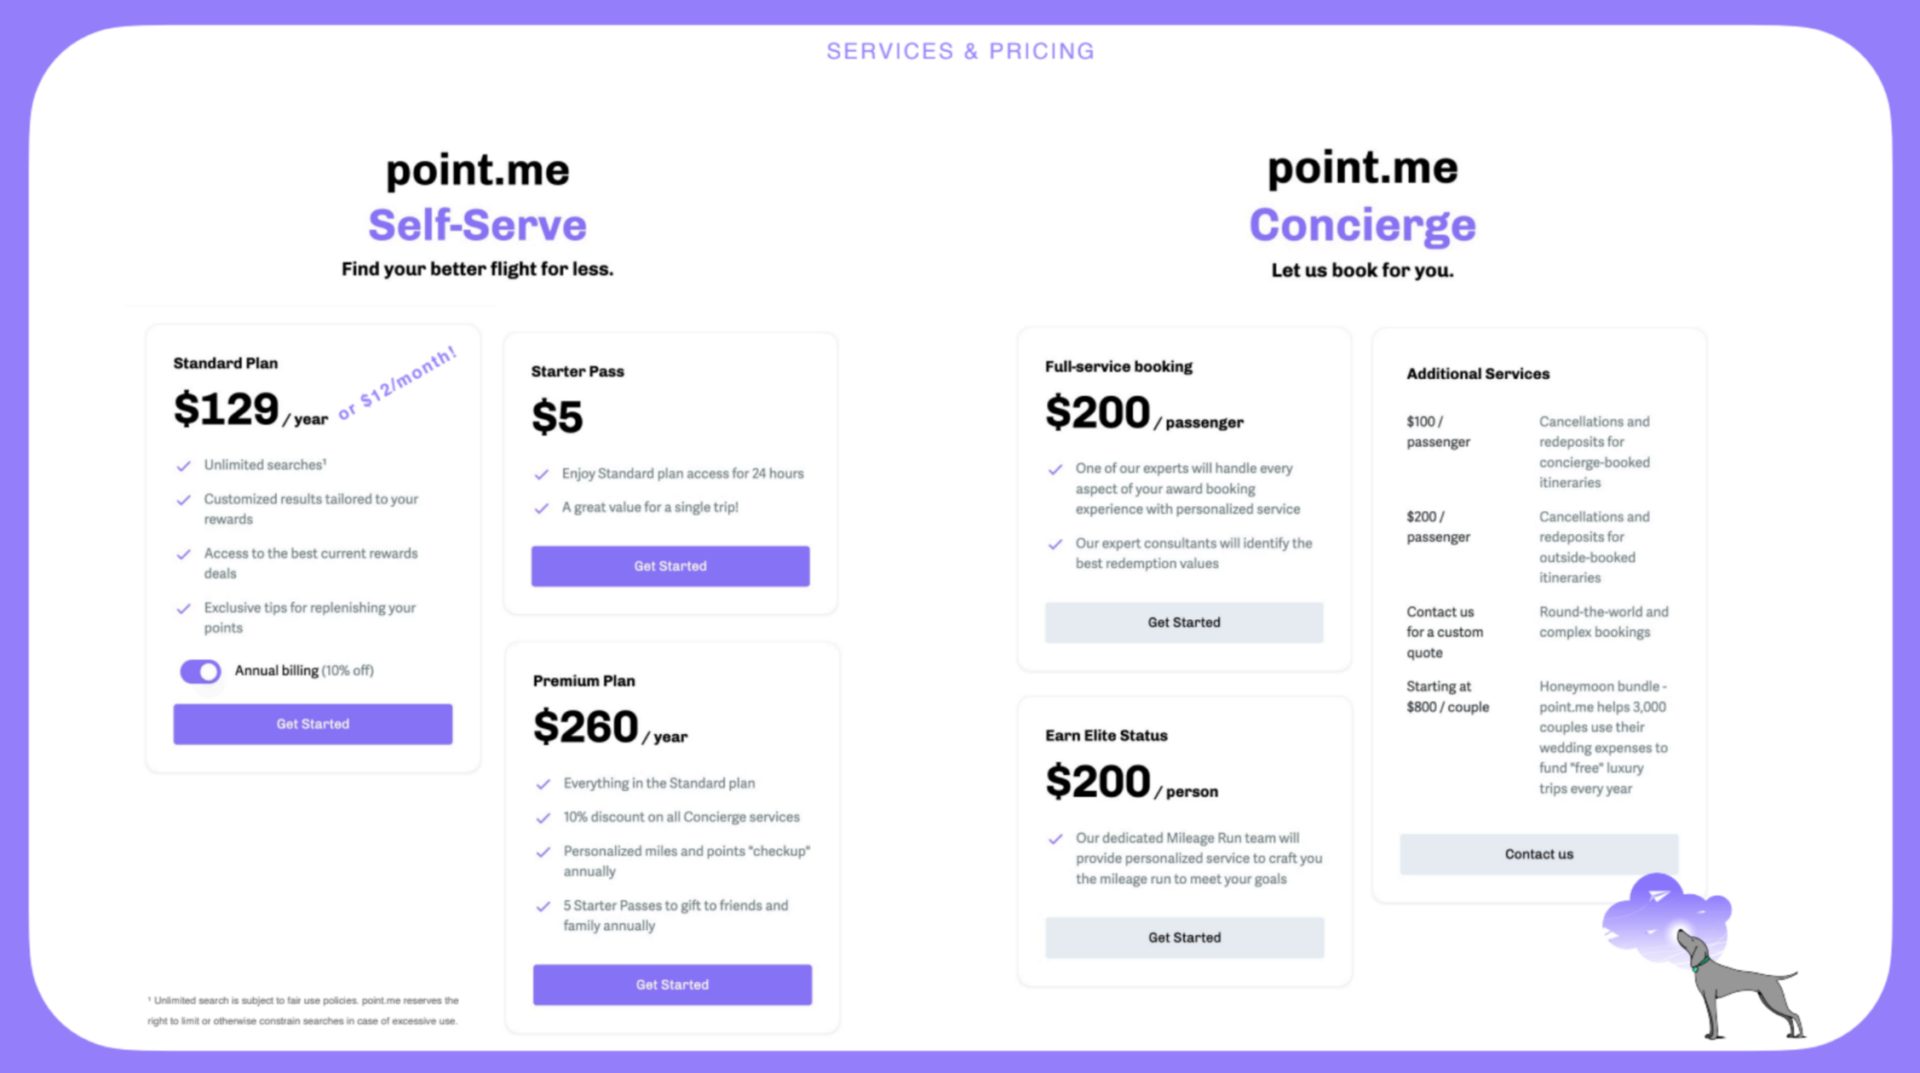 point.me pricing structure